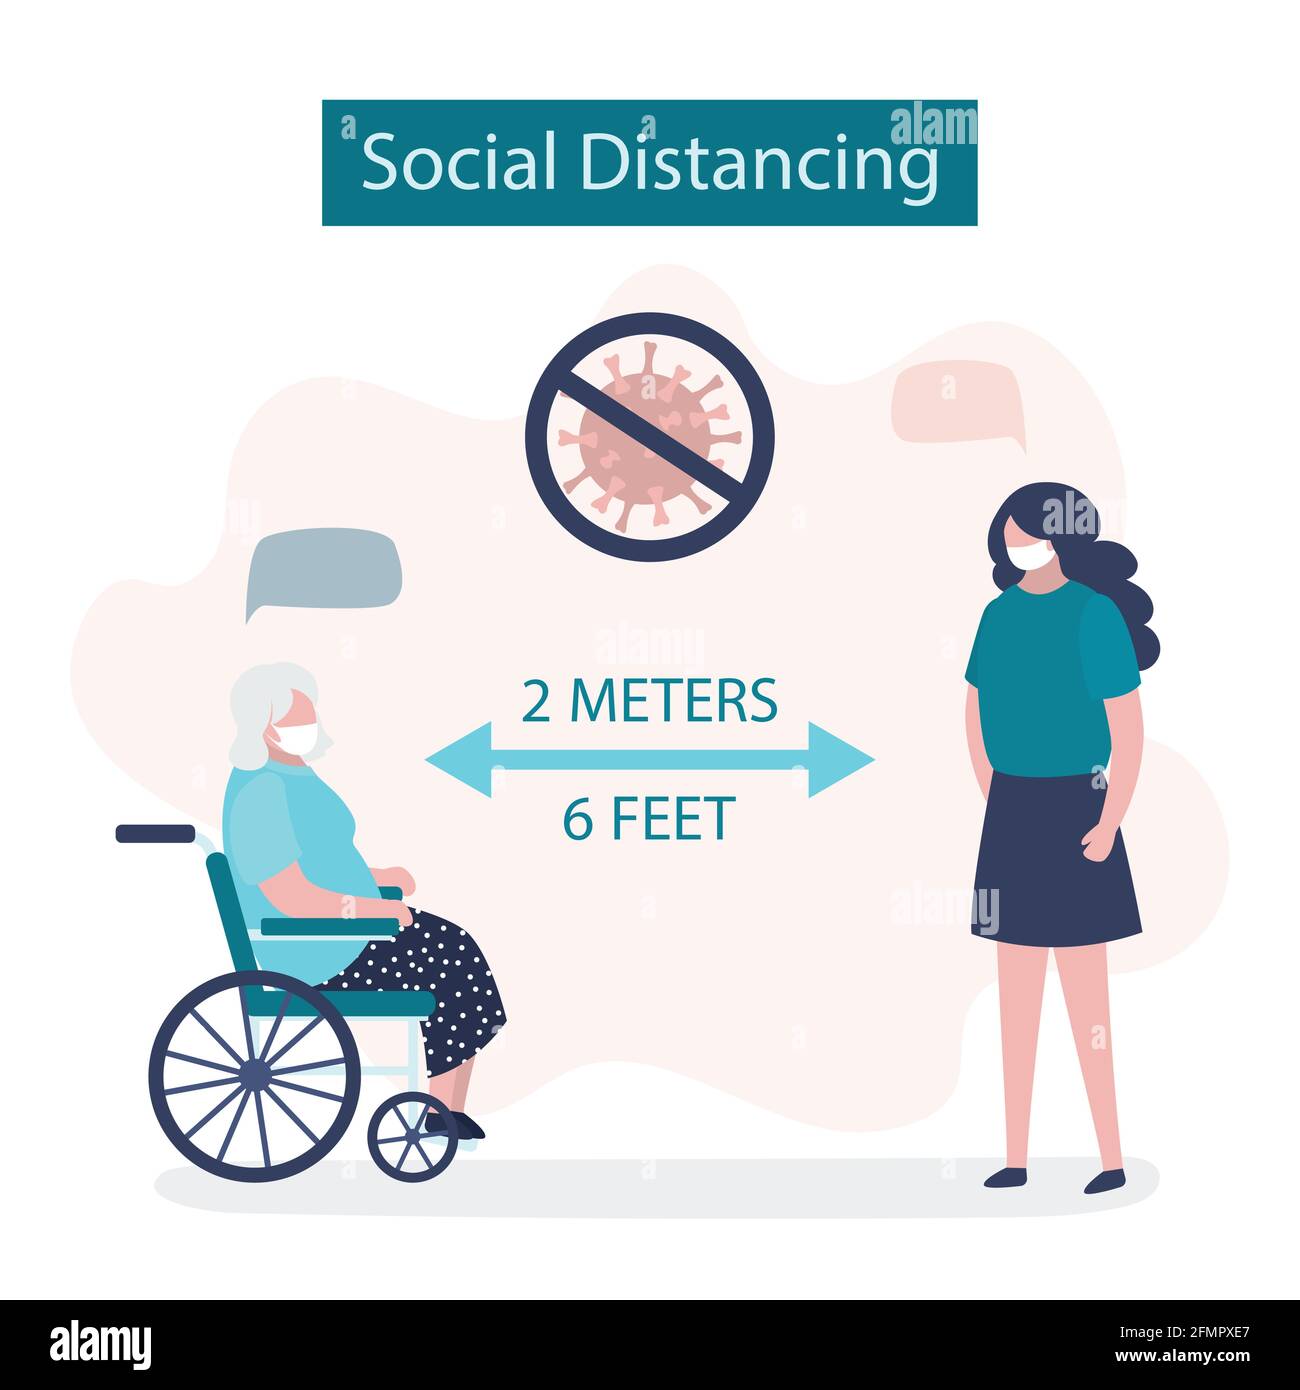 Social Distancing, two people keeping distance for infection risk and disease. 2 meters or 6 feet distance between humans. Covid-19 prevention banner. Stock Vector